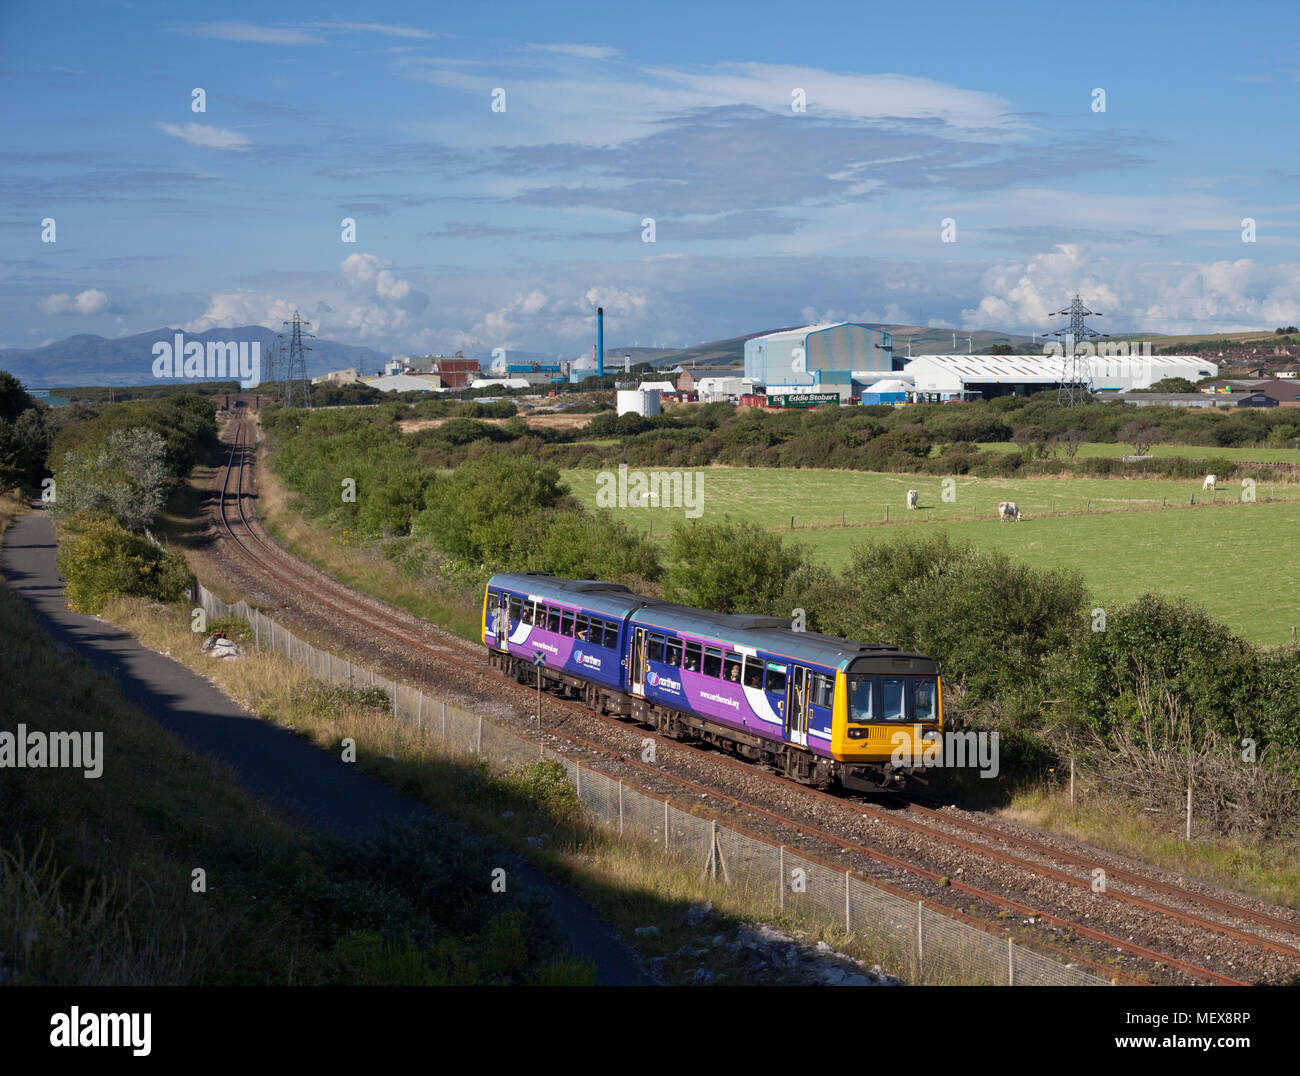 A Northern rail class 142 pacer train at  Ormsgill (Barrow in Furness) on the Cumbrian coast railway line Stock Photo